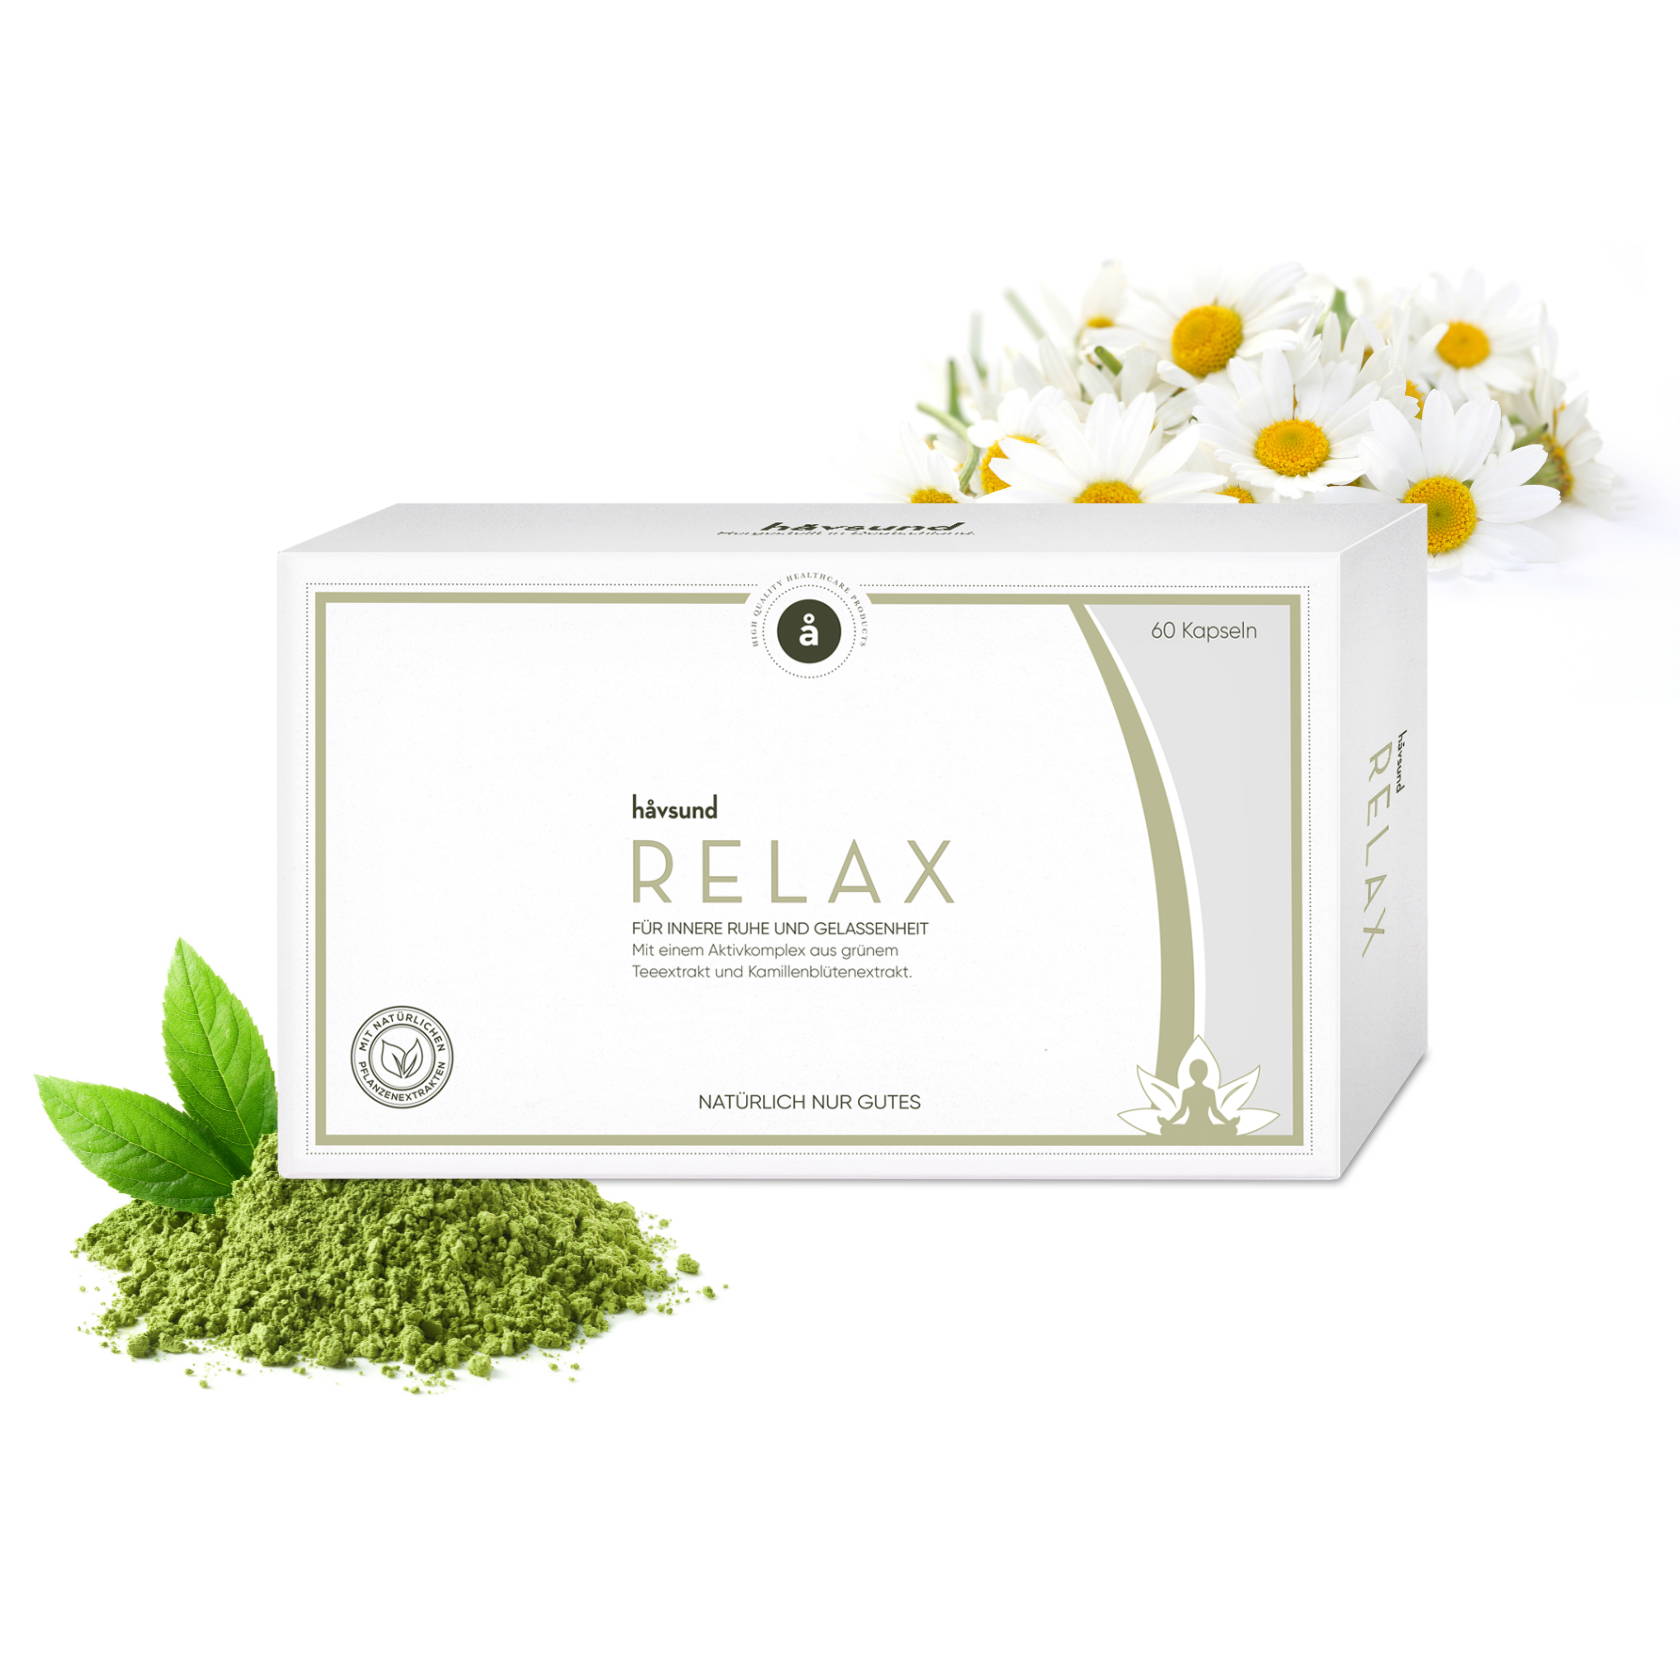 håvsund Relax product image with ingredients